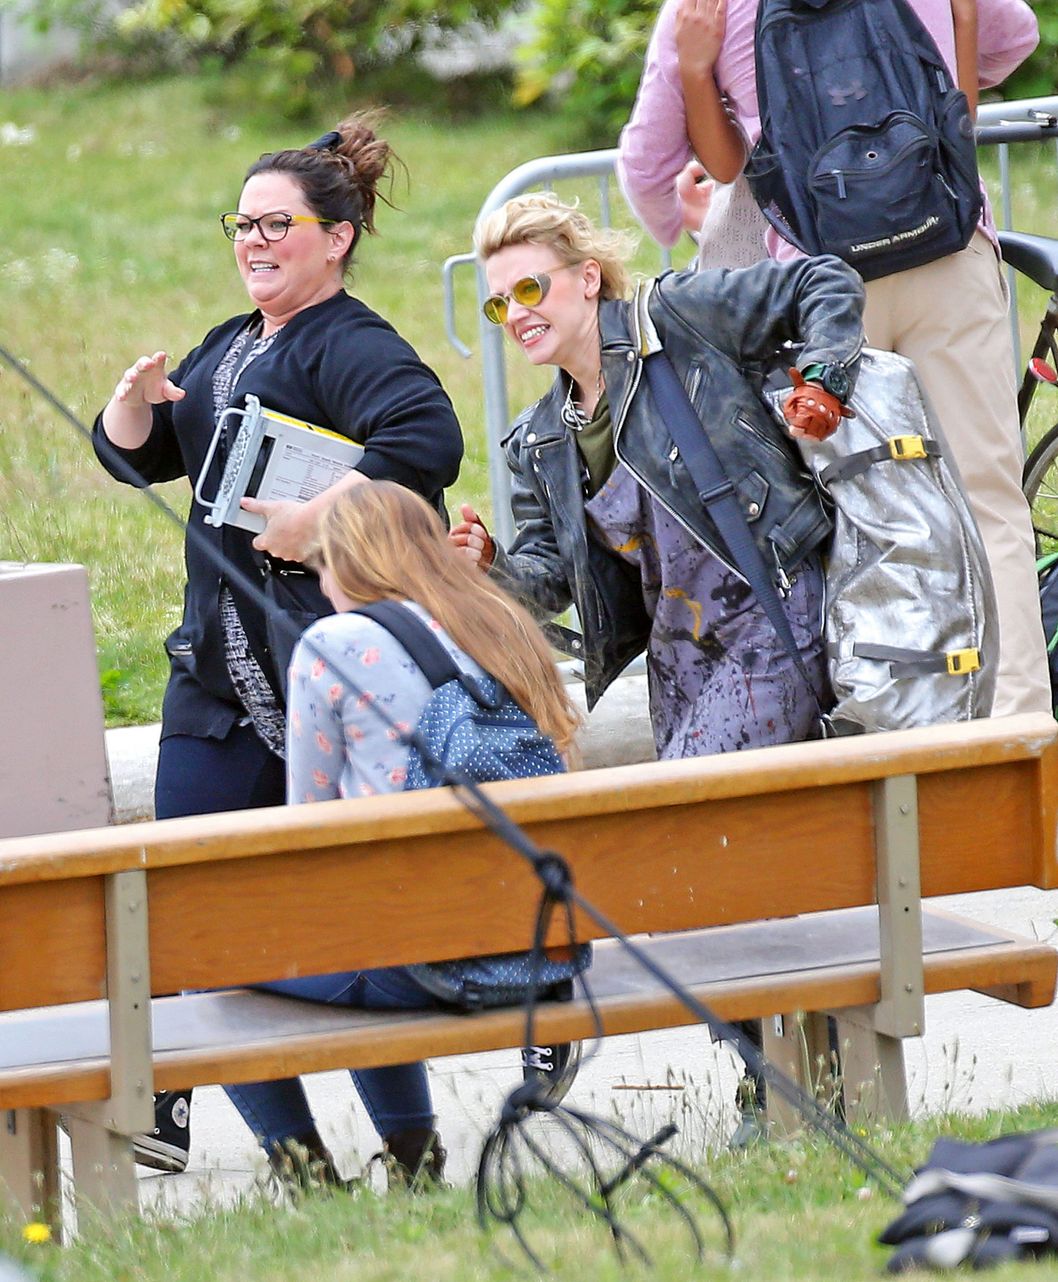 Melissa McCarthy, Kate McKinnon, and Kristin Wiig all together for 1st day of filming all girl 'Ghostbusters' in Boston with slime on pants and ghost trap